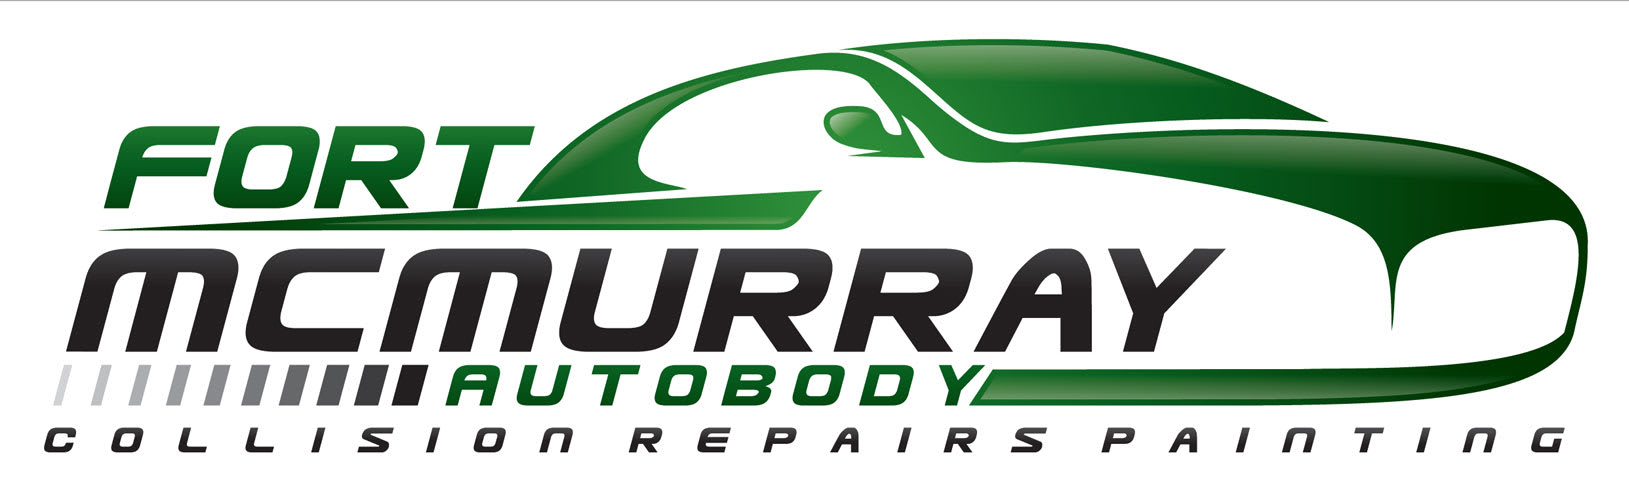 Fort McMurray Autobody